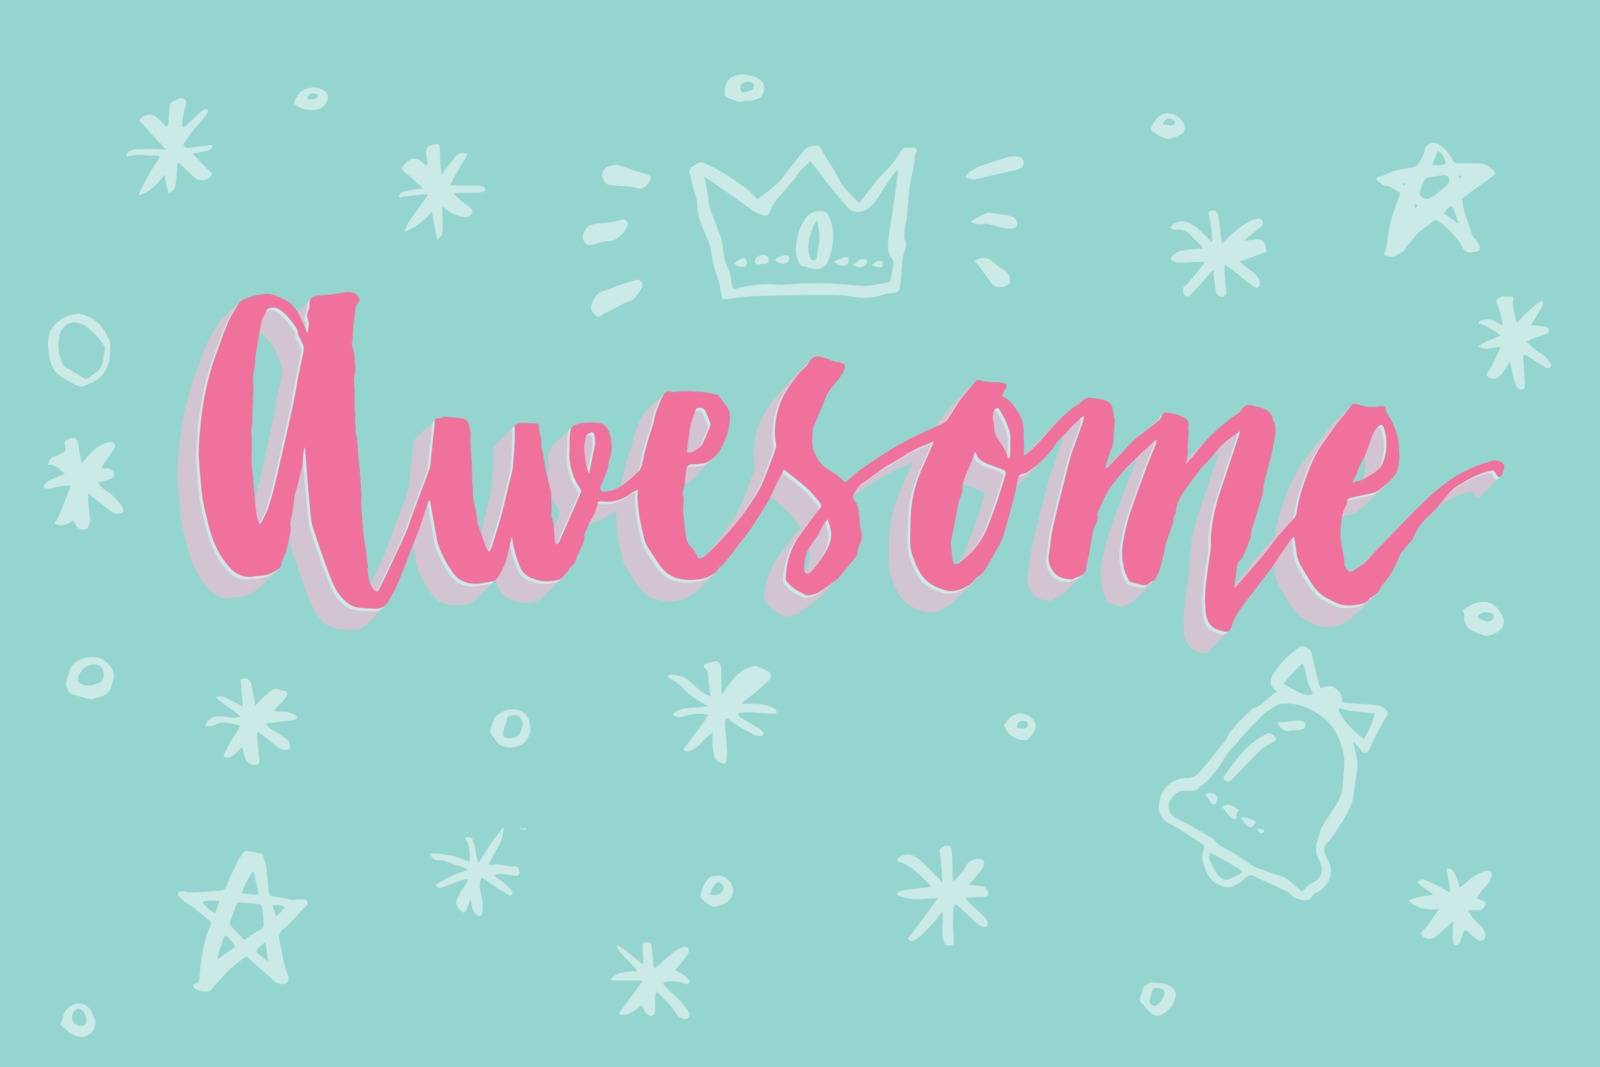 Awesome word lettering with hand drawn cute doodle elements